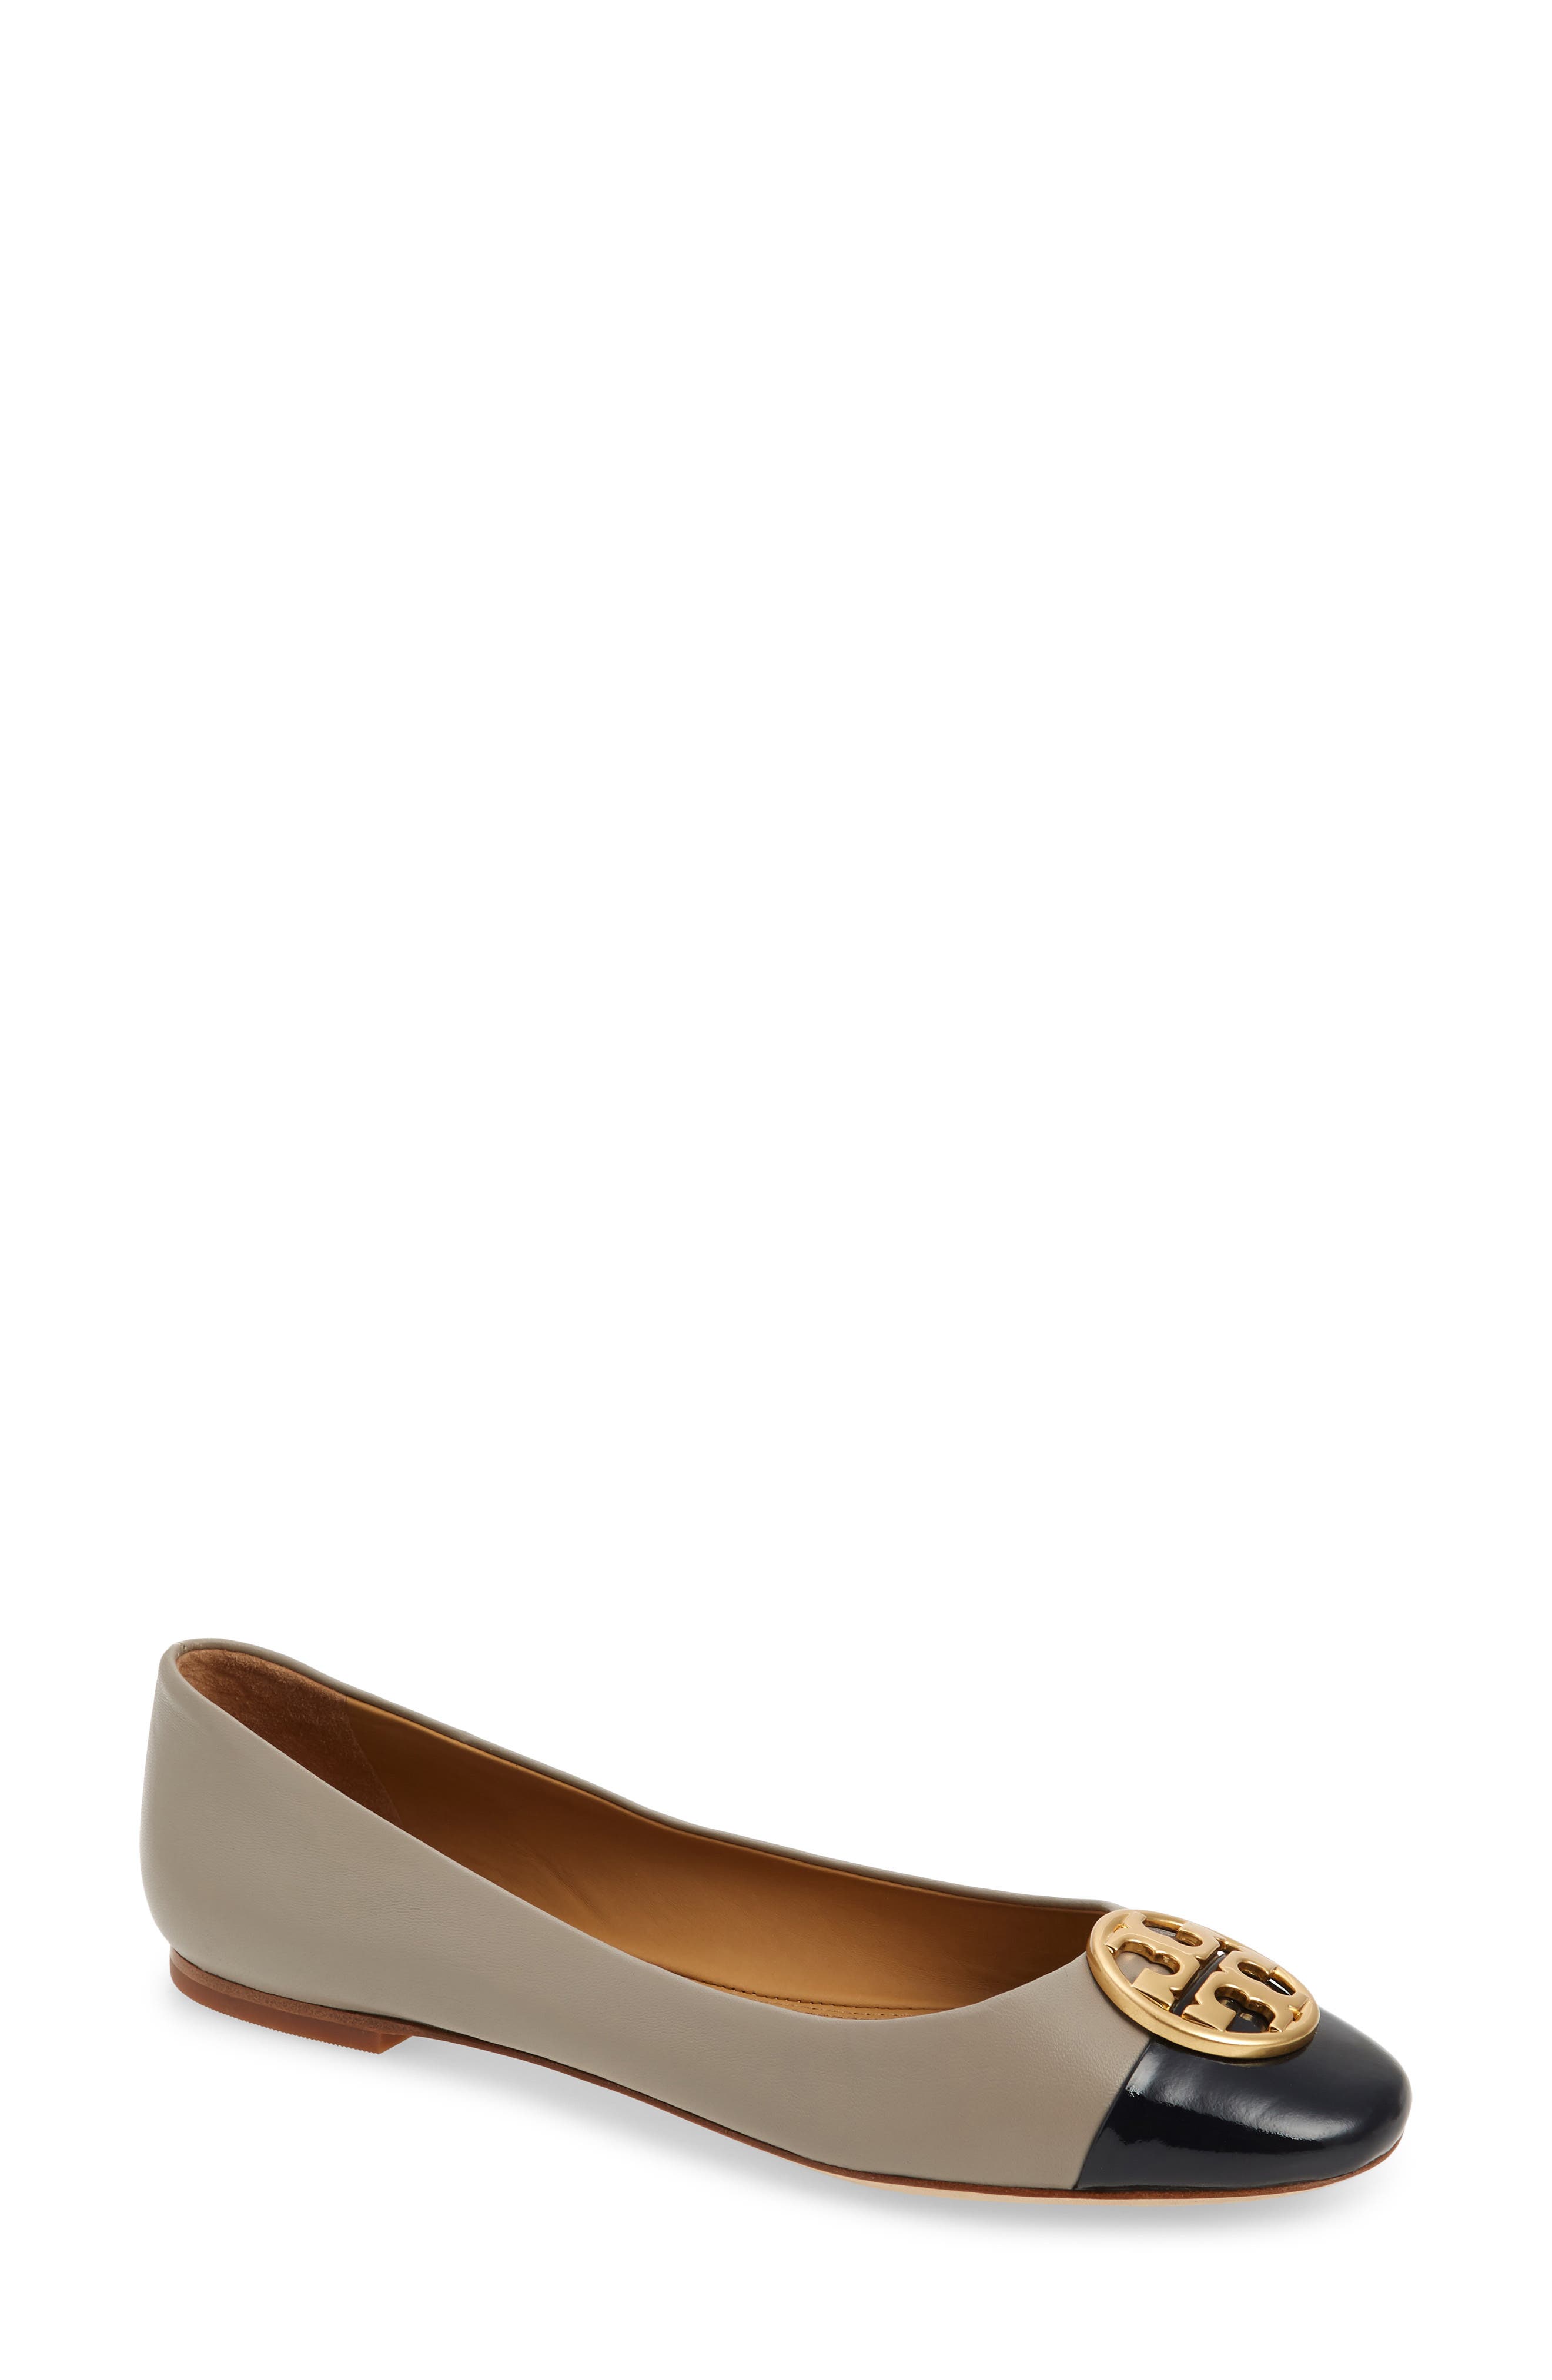 tory burch chelsea shoes